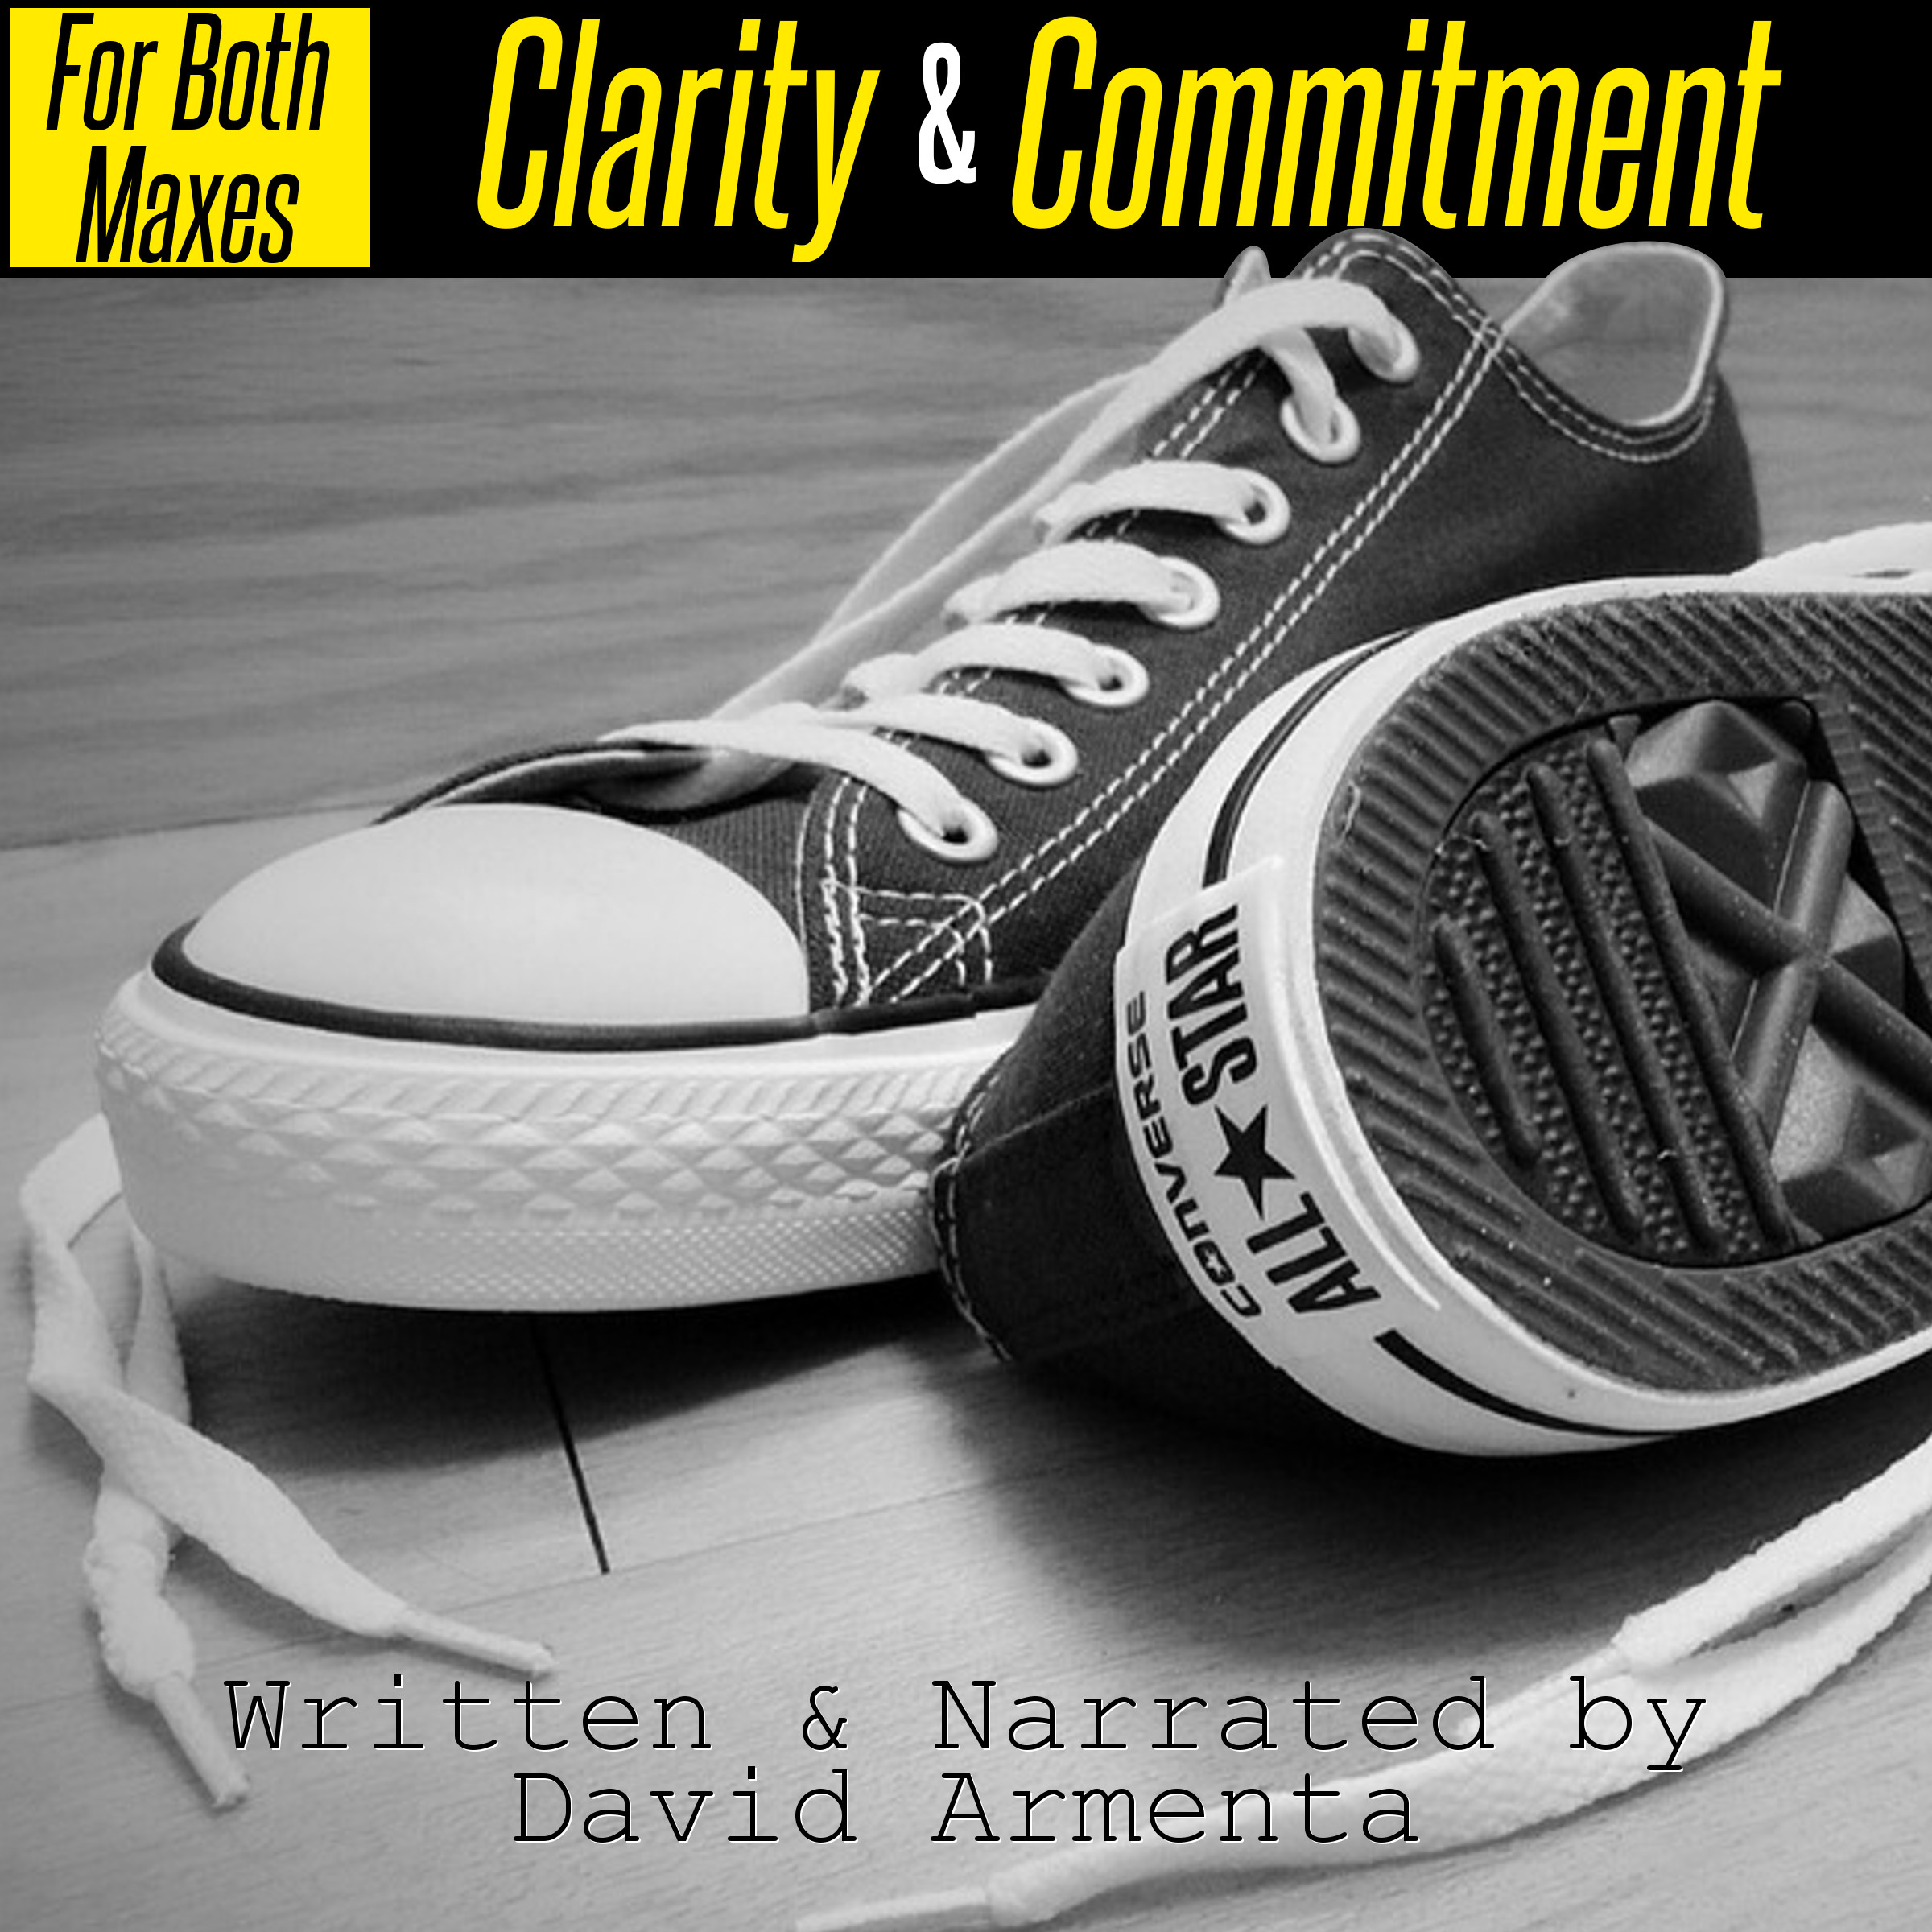 For Both Maxes: Clarity & Commitment